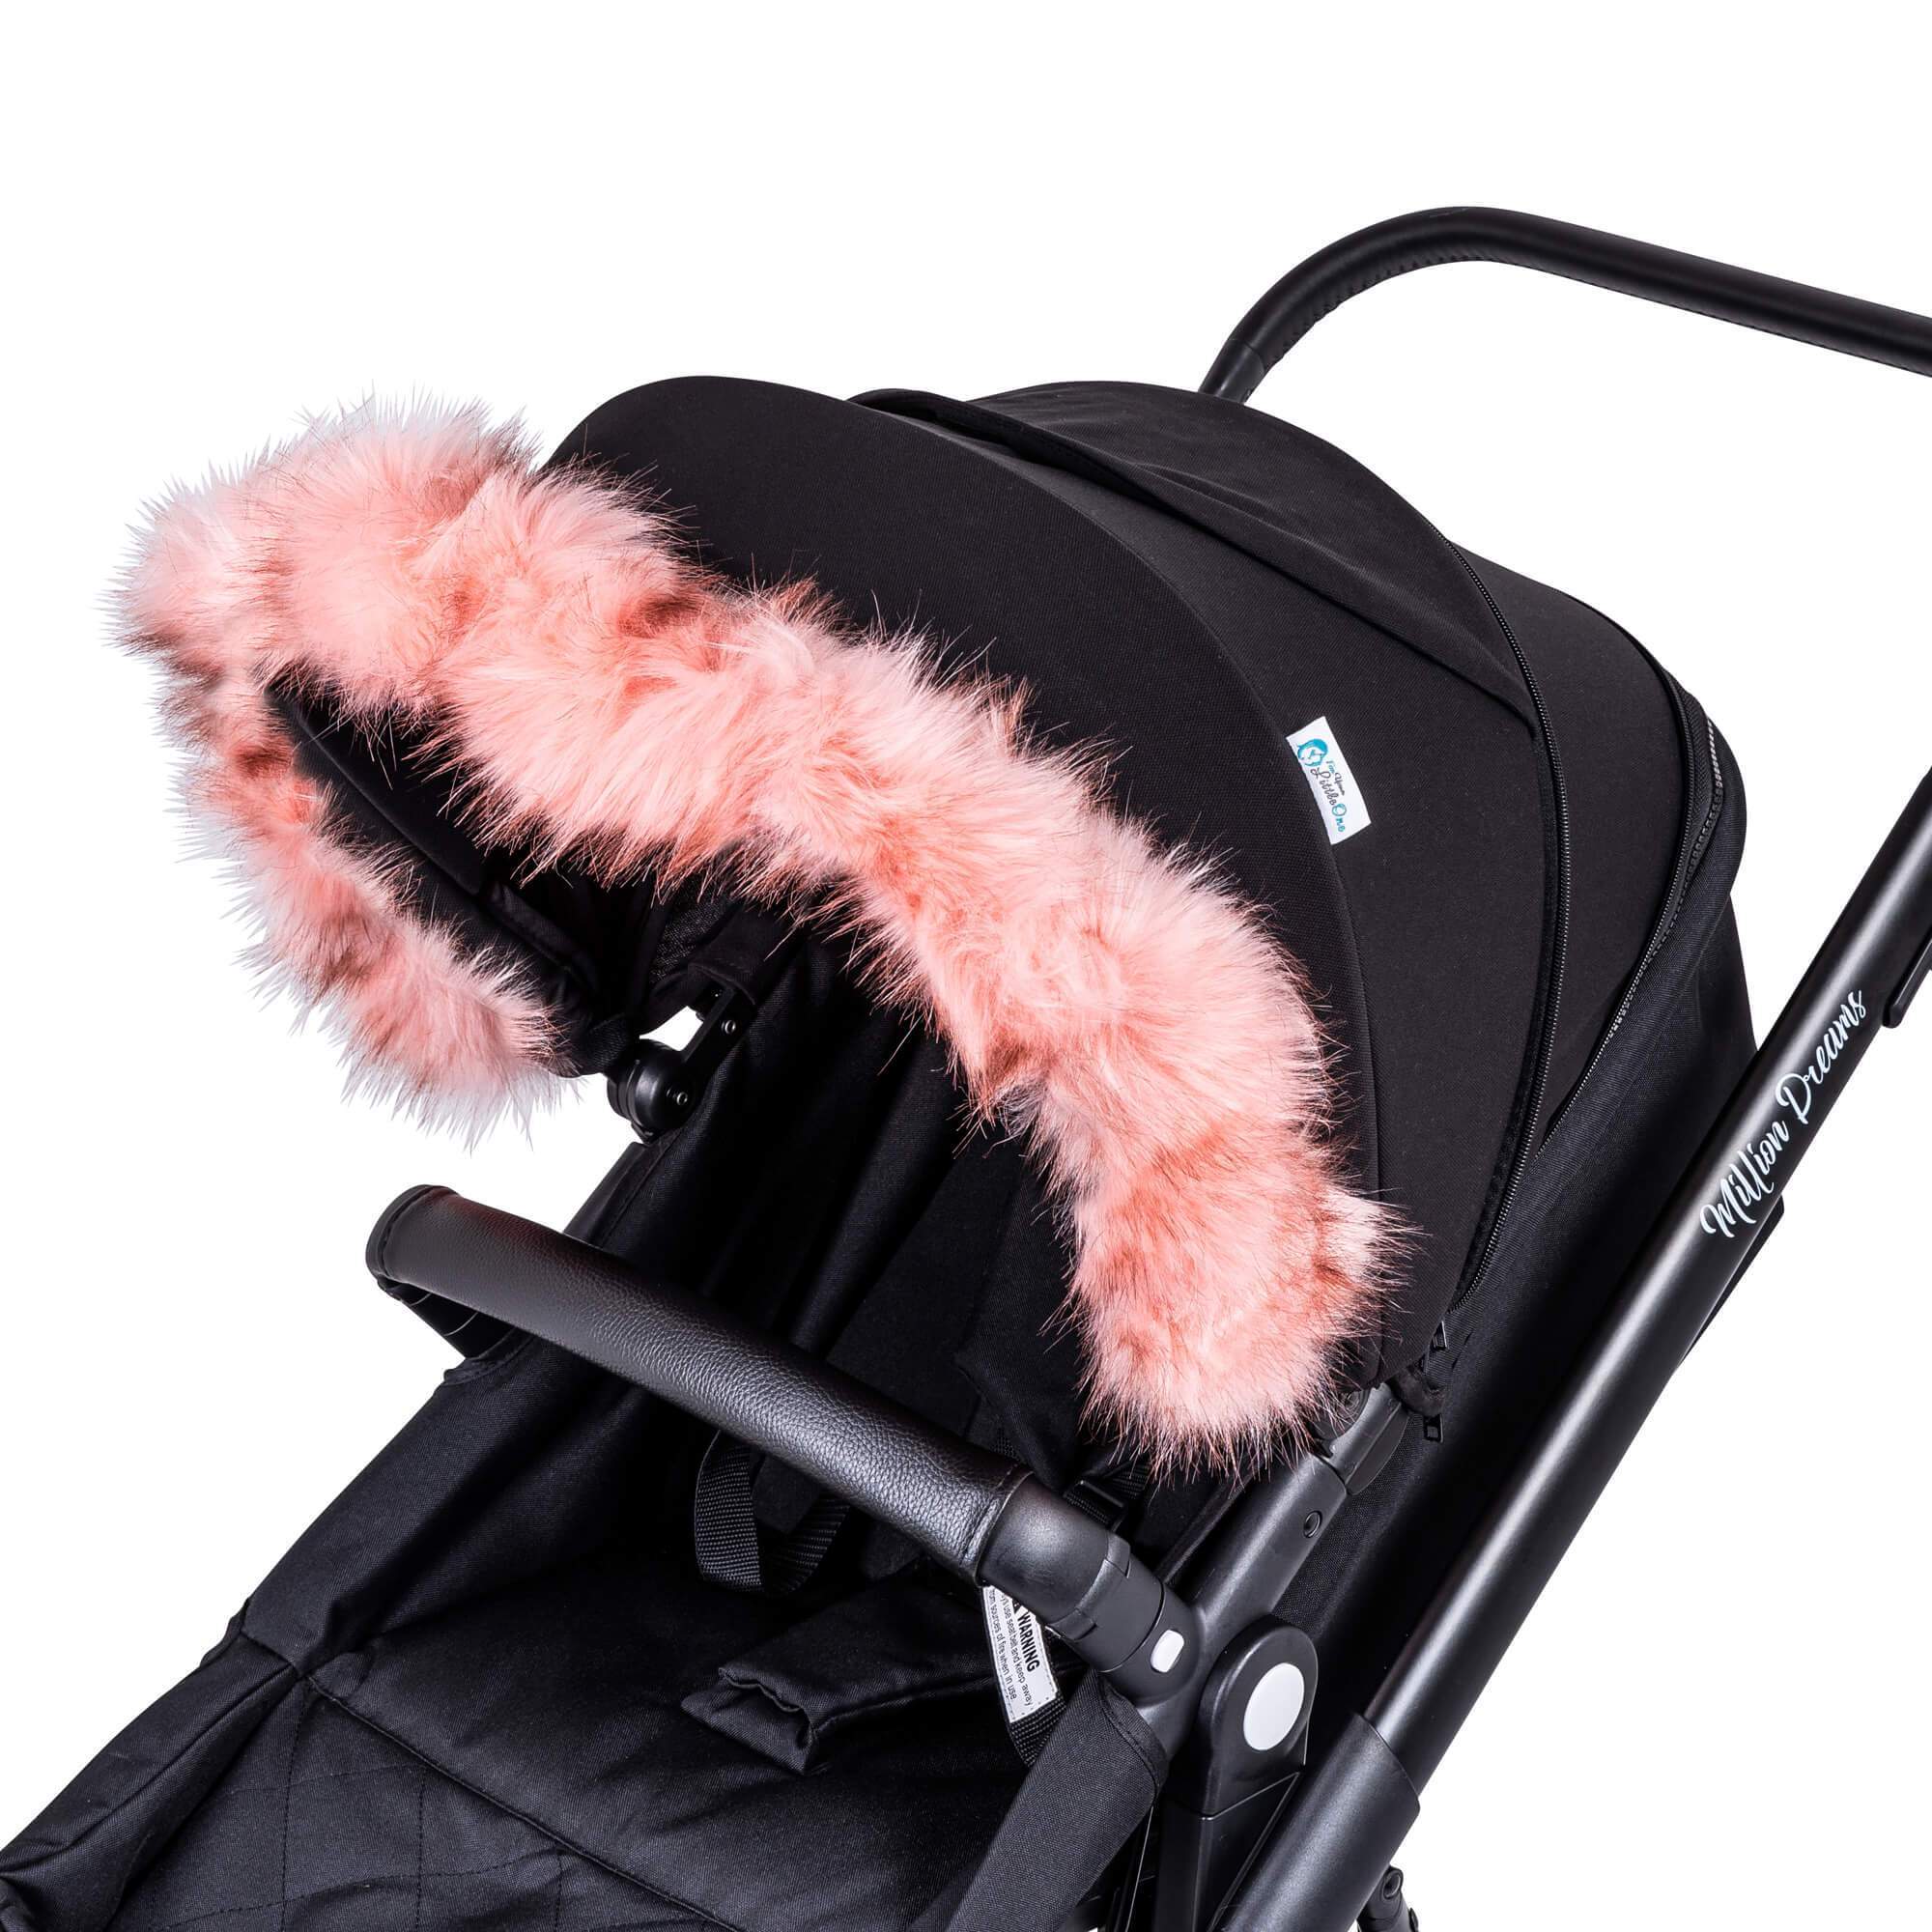 Pram Fur Hood Trim Attachment for Pushchair Compatible with Greentom - For Your Little One